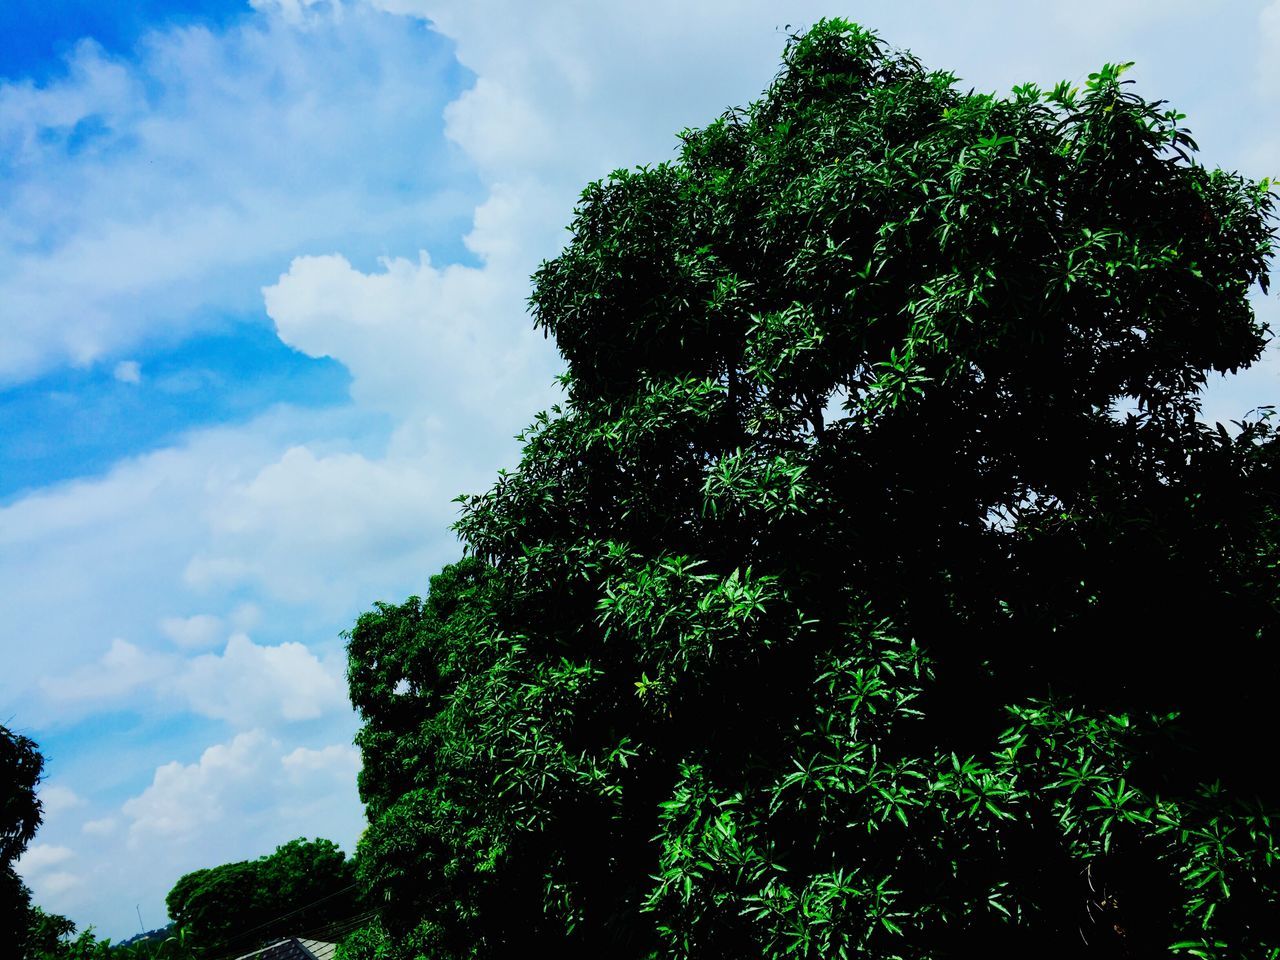 tree, low angle view, sky, growth, green color, nature, tranquility, beauty in nature, cloud - sky, lush foliage, tranquil scene, cloud, scenics, day, outdoors, no people, green, high section, cloudy, idyllic, blue, non urban scene, growing, non-urban scene